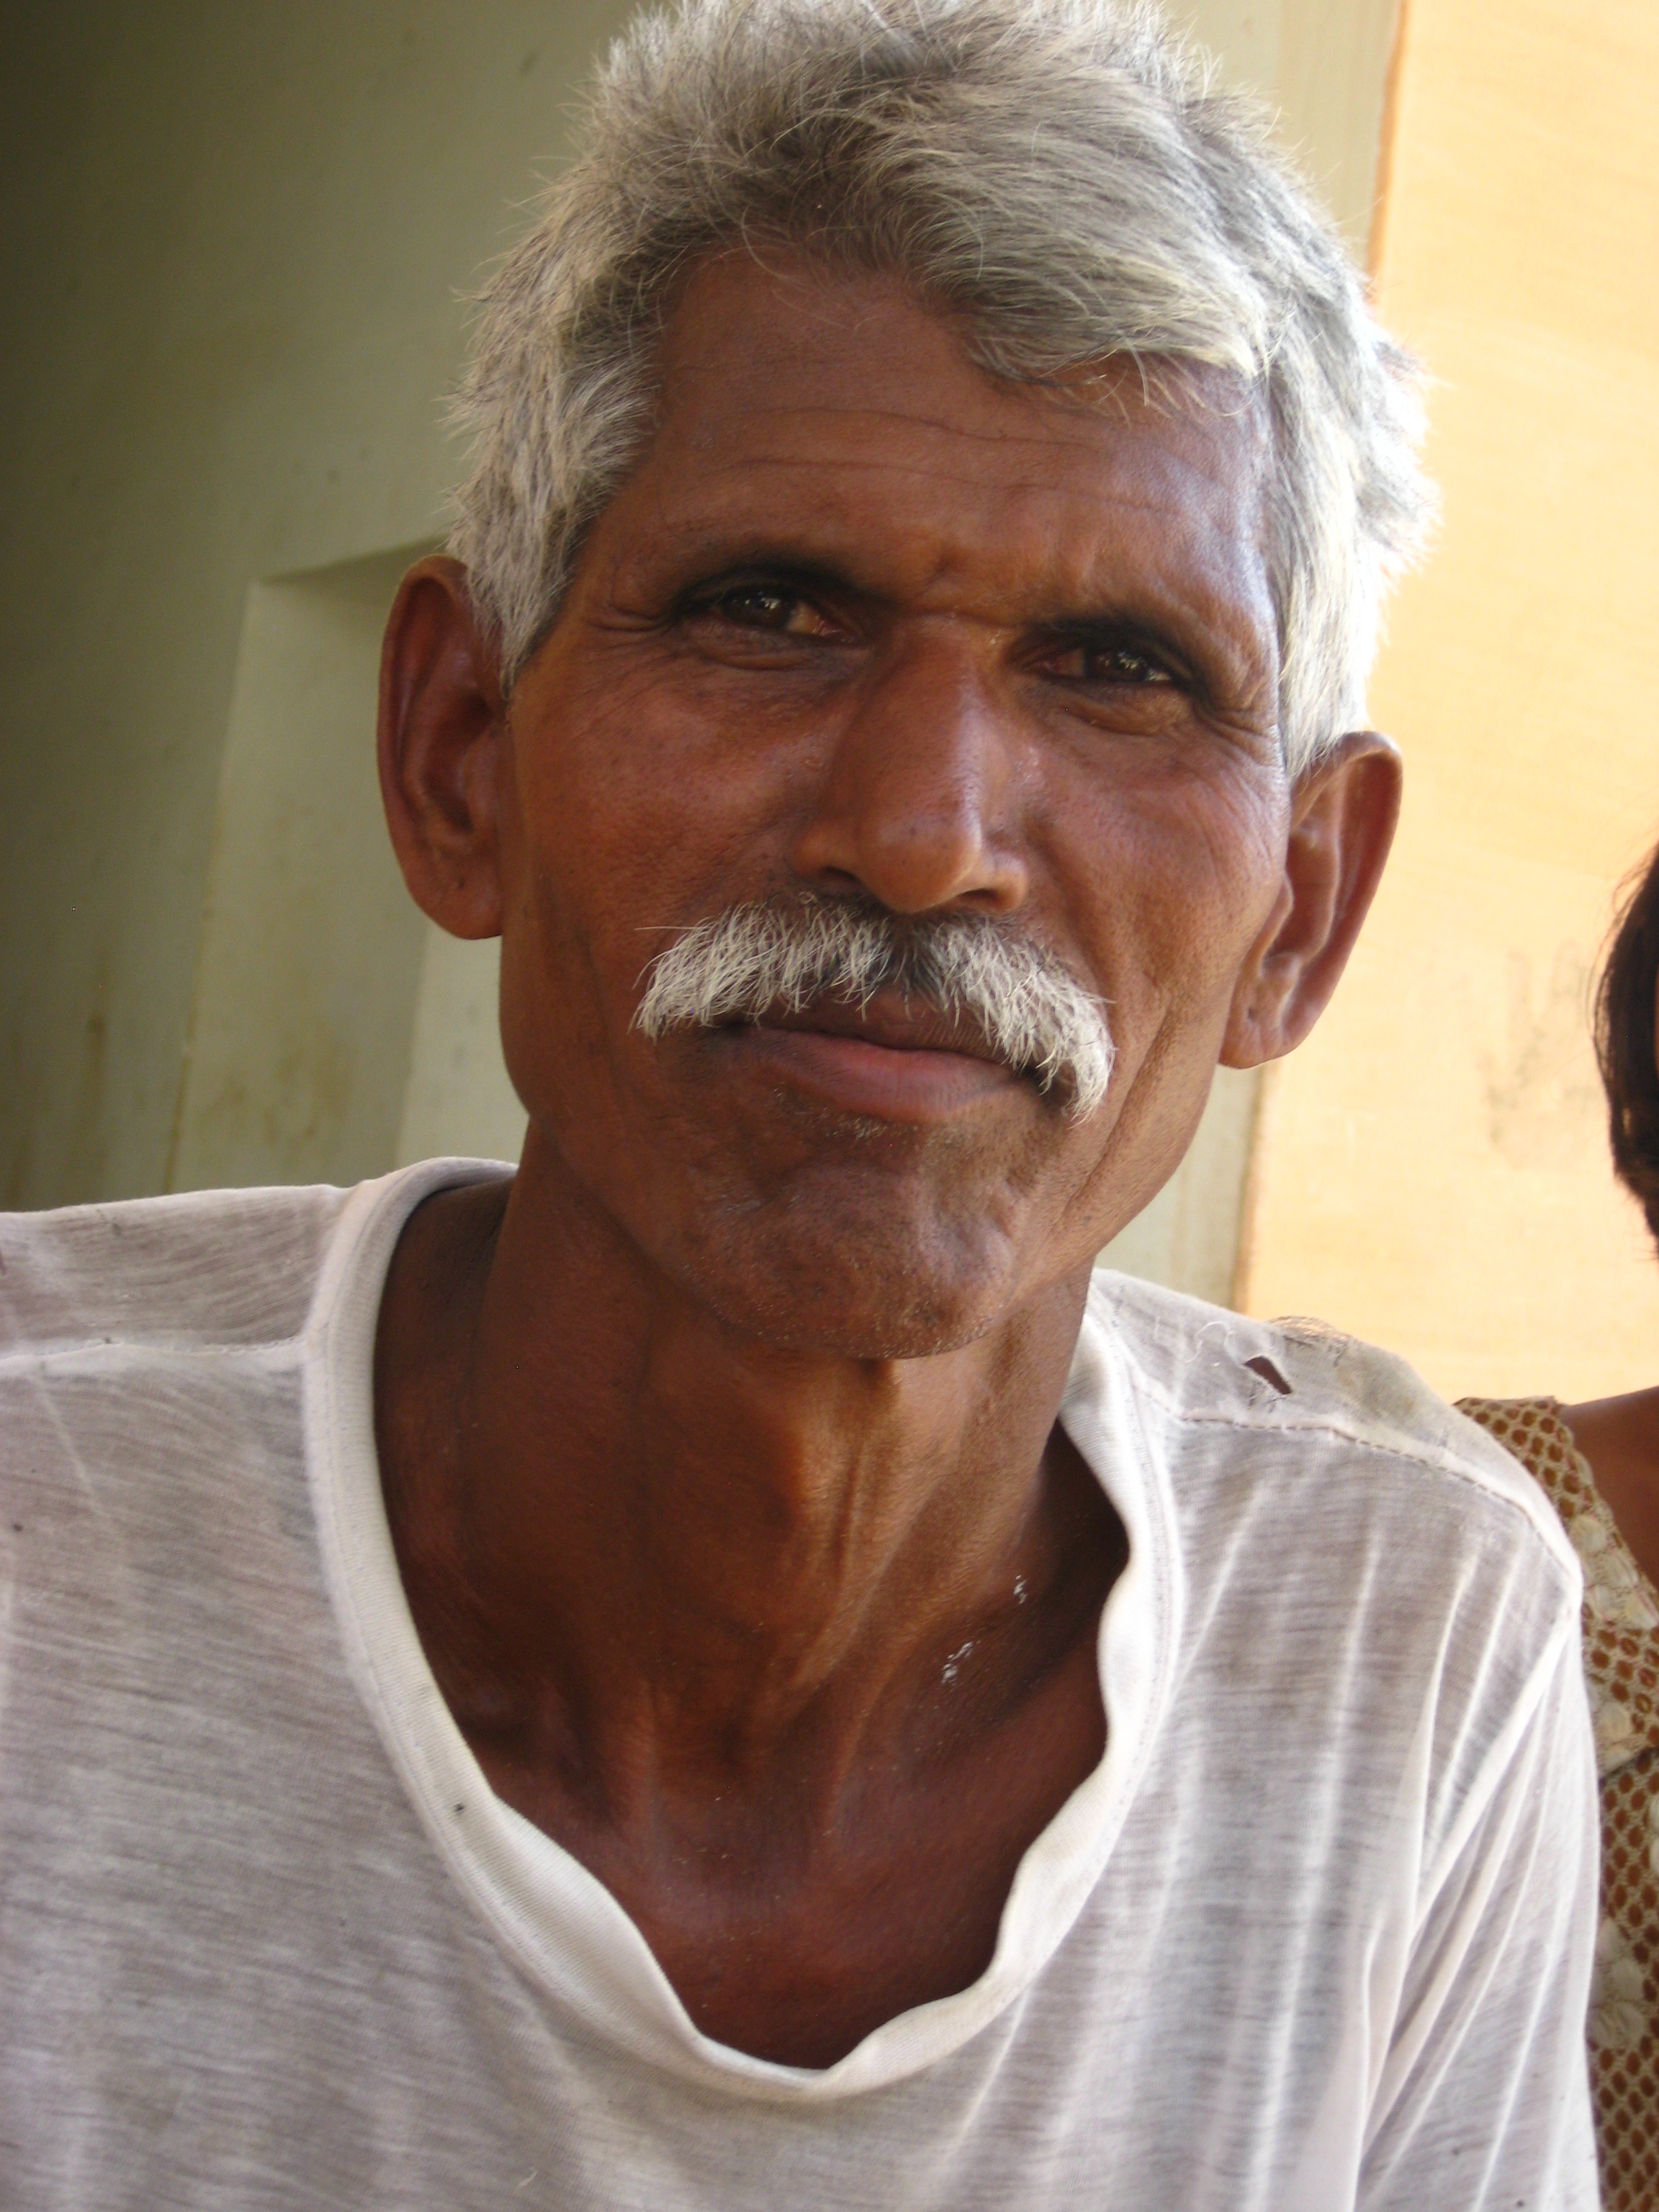 Older man in t-shirt with gray hair and mustache